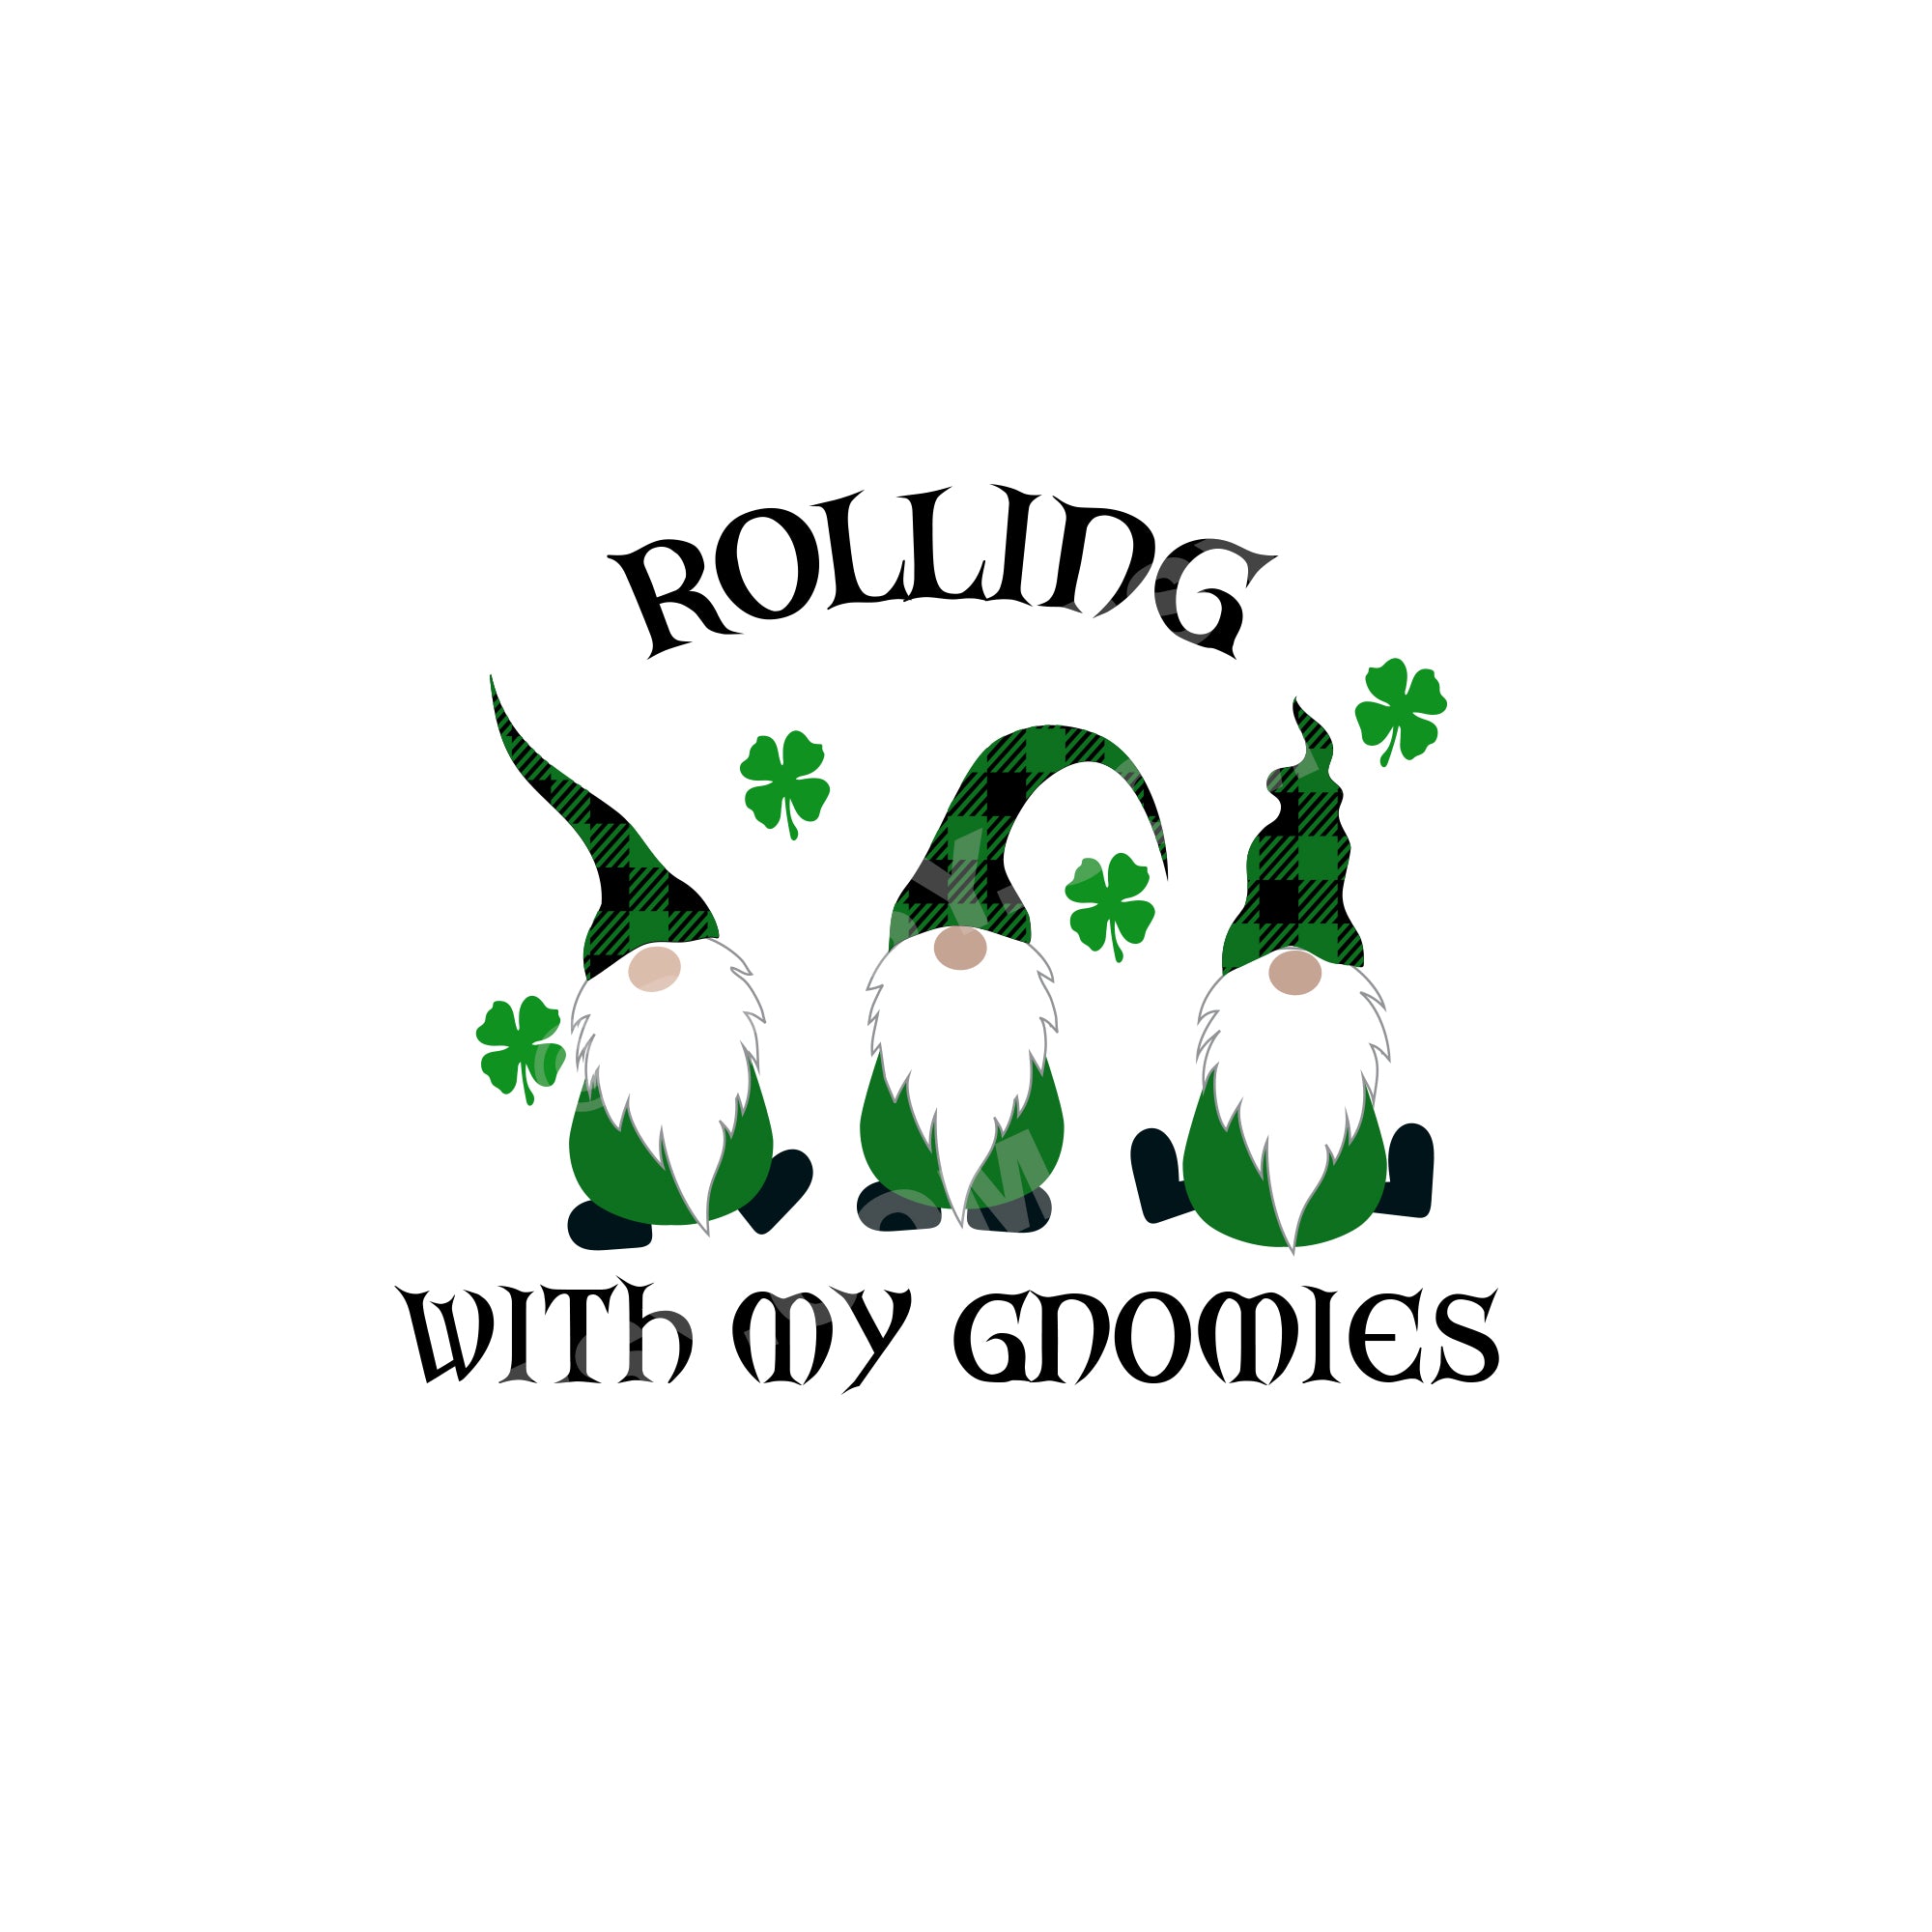 St. Patrick's Day Tea Towel, Rolling with my Gnomies